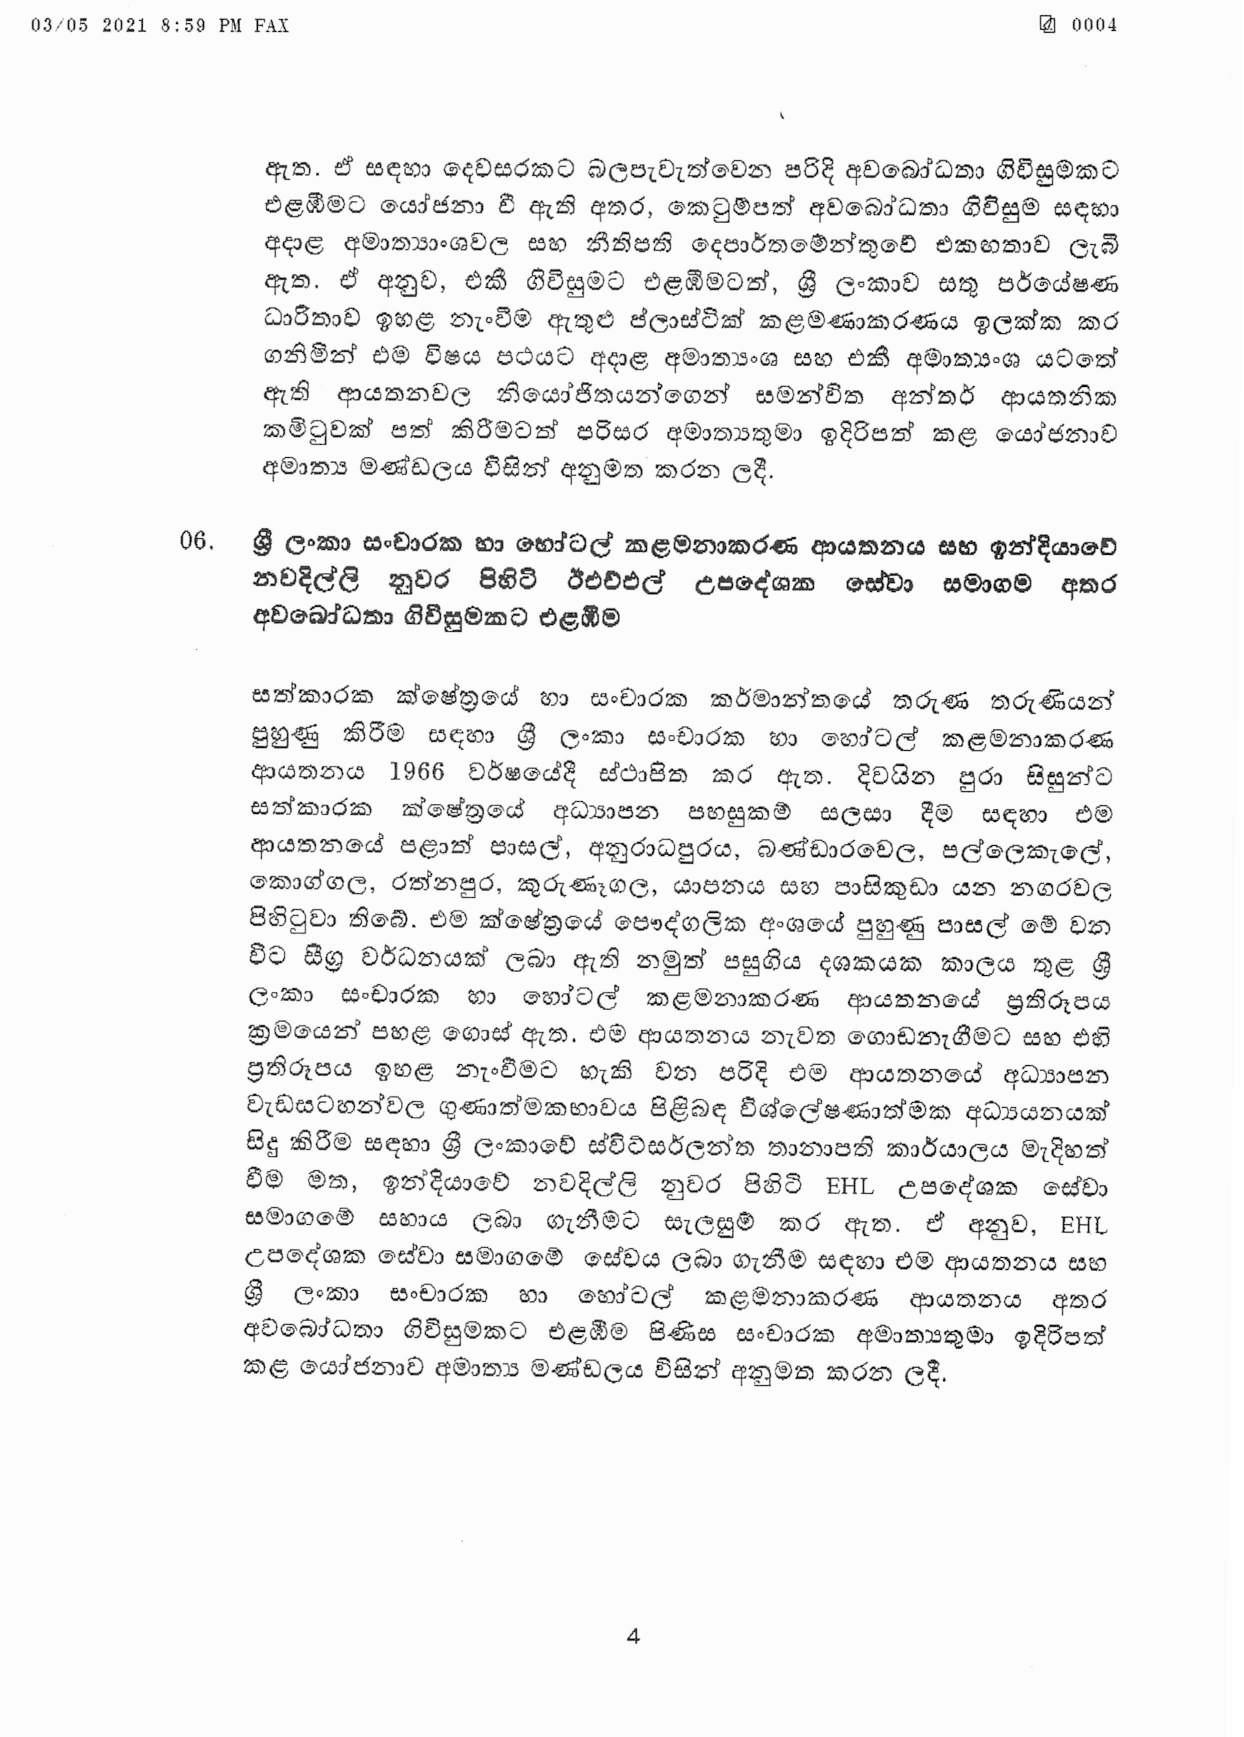 Cabinet Decision on 03.05.2021Sinhala page 004